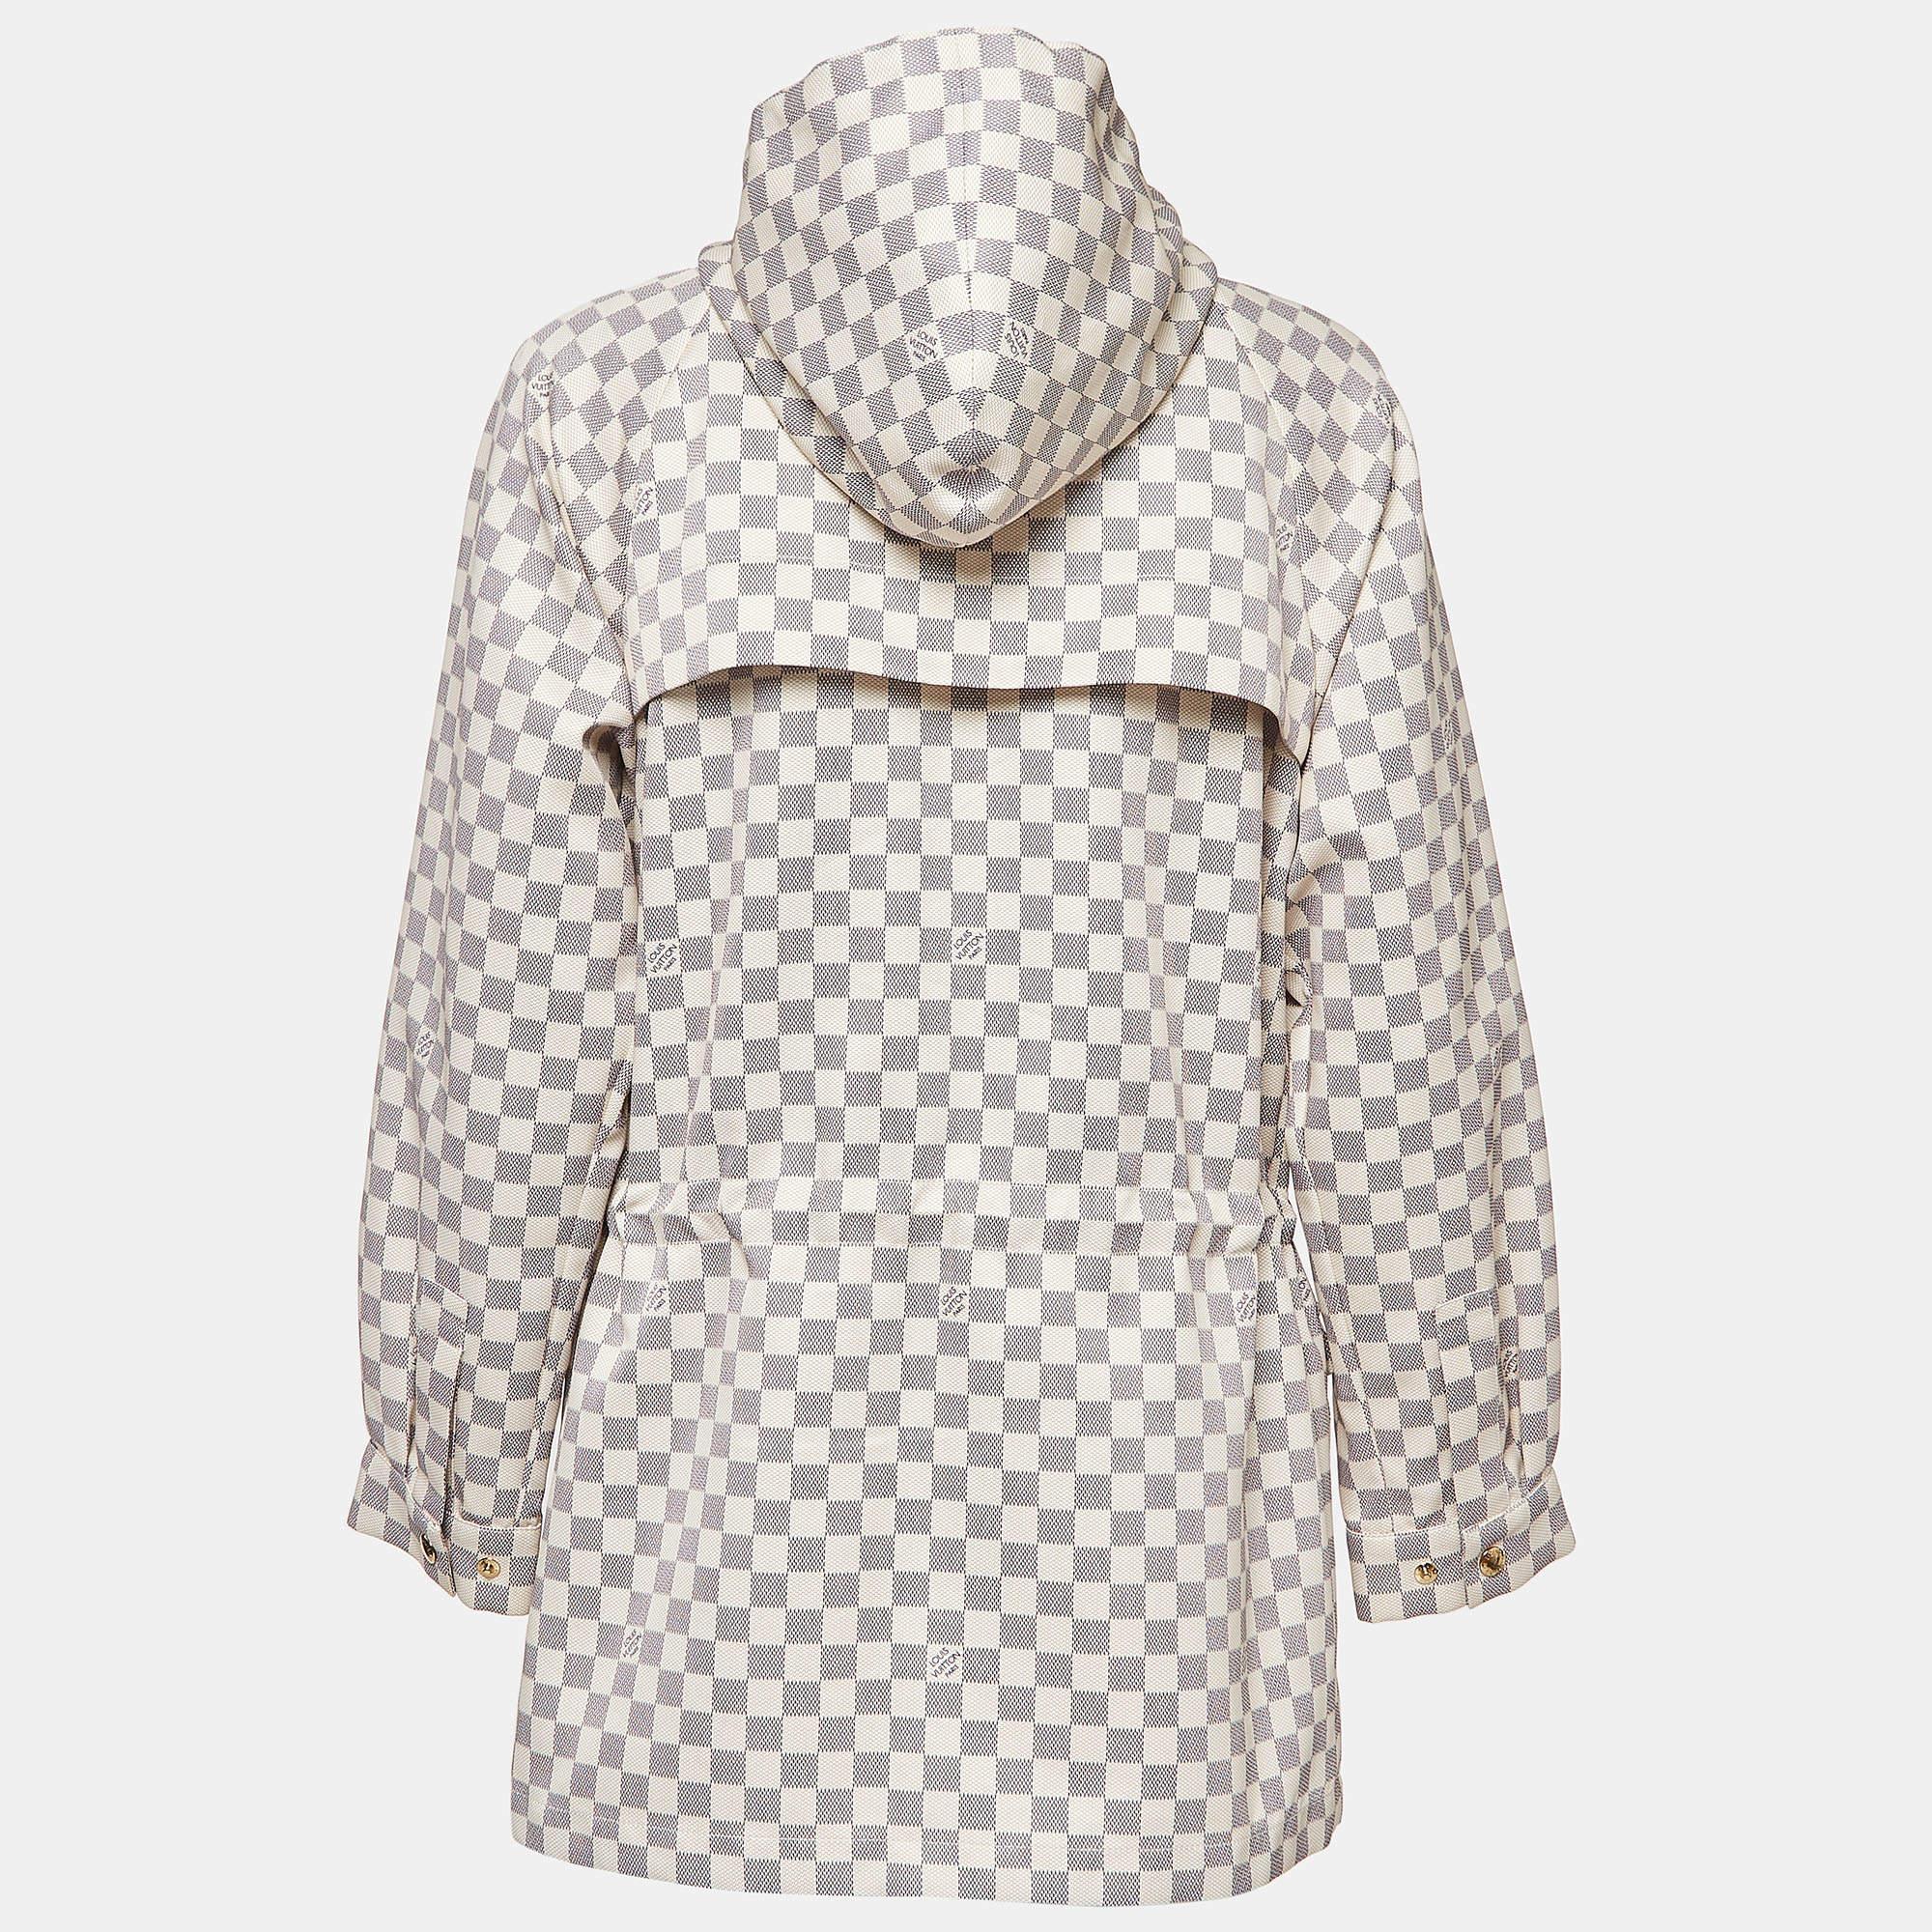 Immerse yourself in luxury with the Louis Vuitton jacket. Crafted with exquisite attention to detail, this jacket seamlessly combines style and functionality. Its creamy hue and iconic Damier Azur print exude timeless sophistication, while the nylon